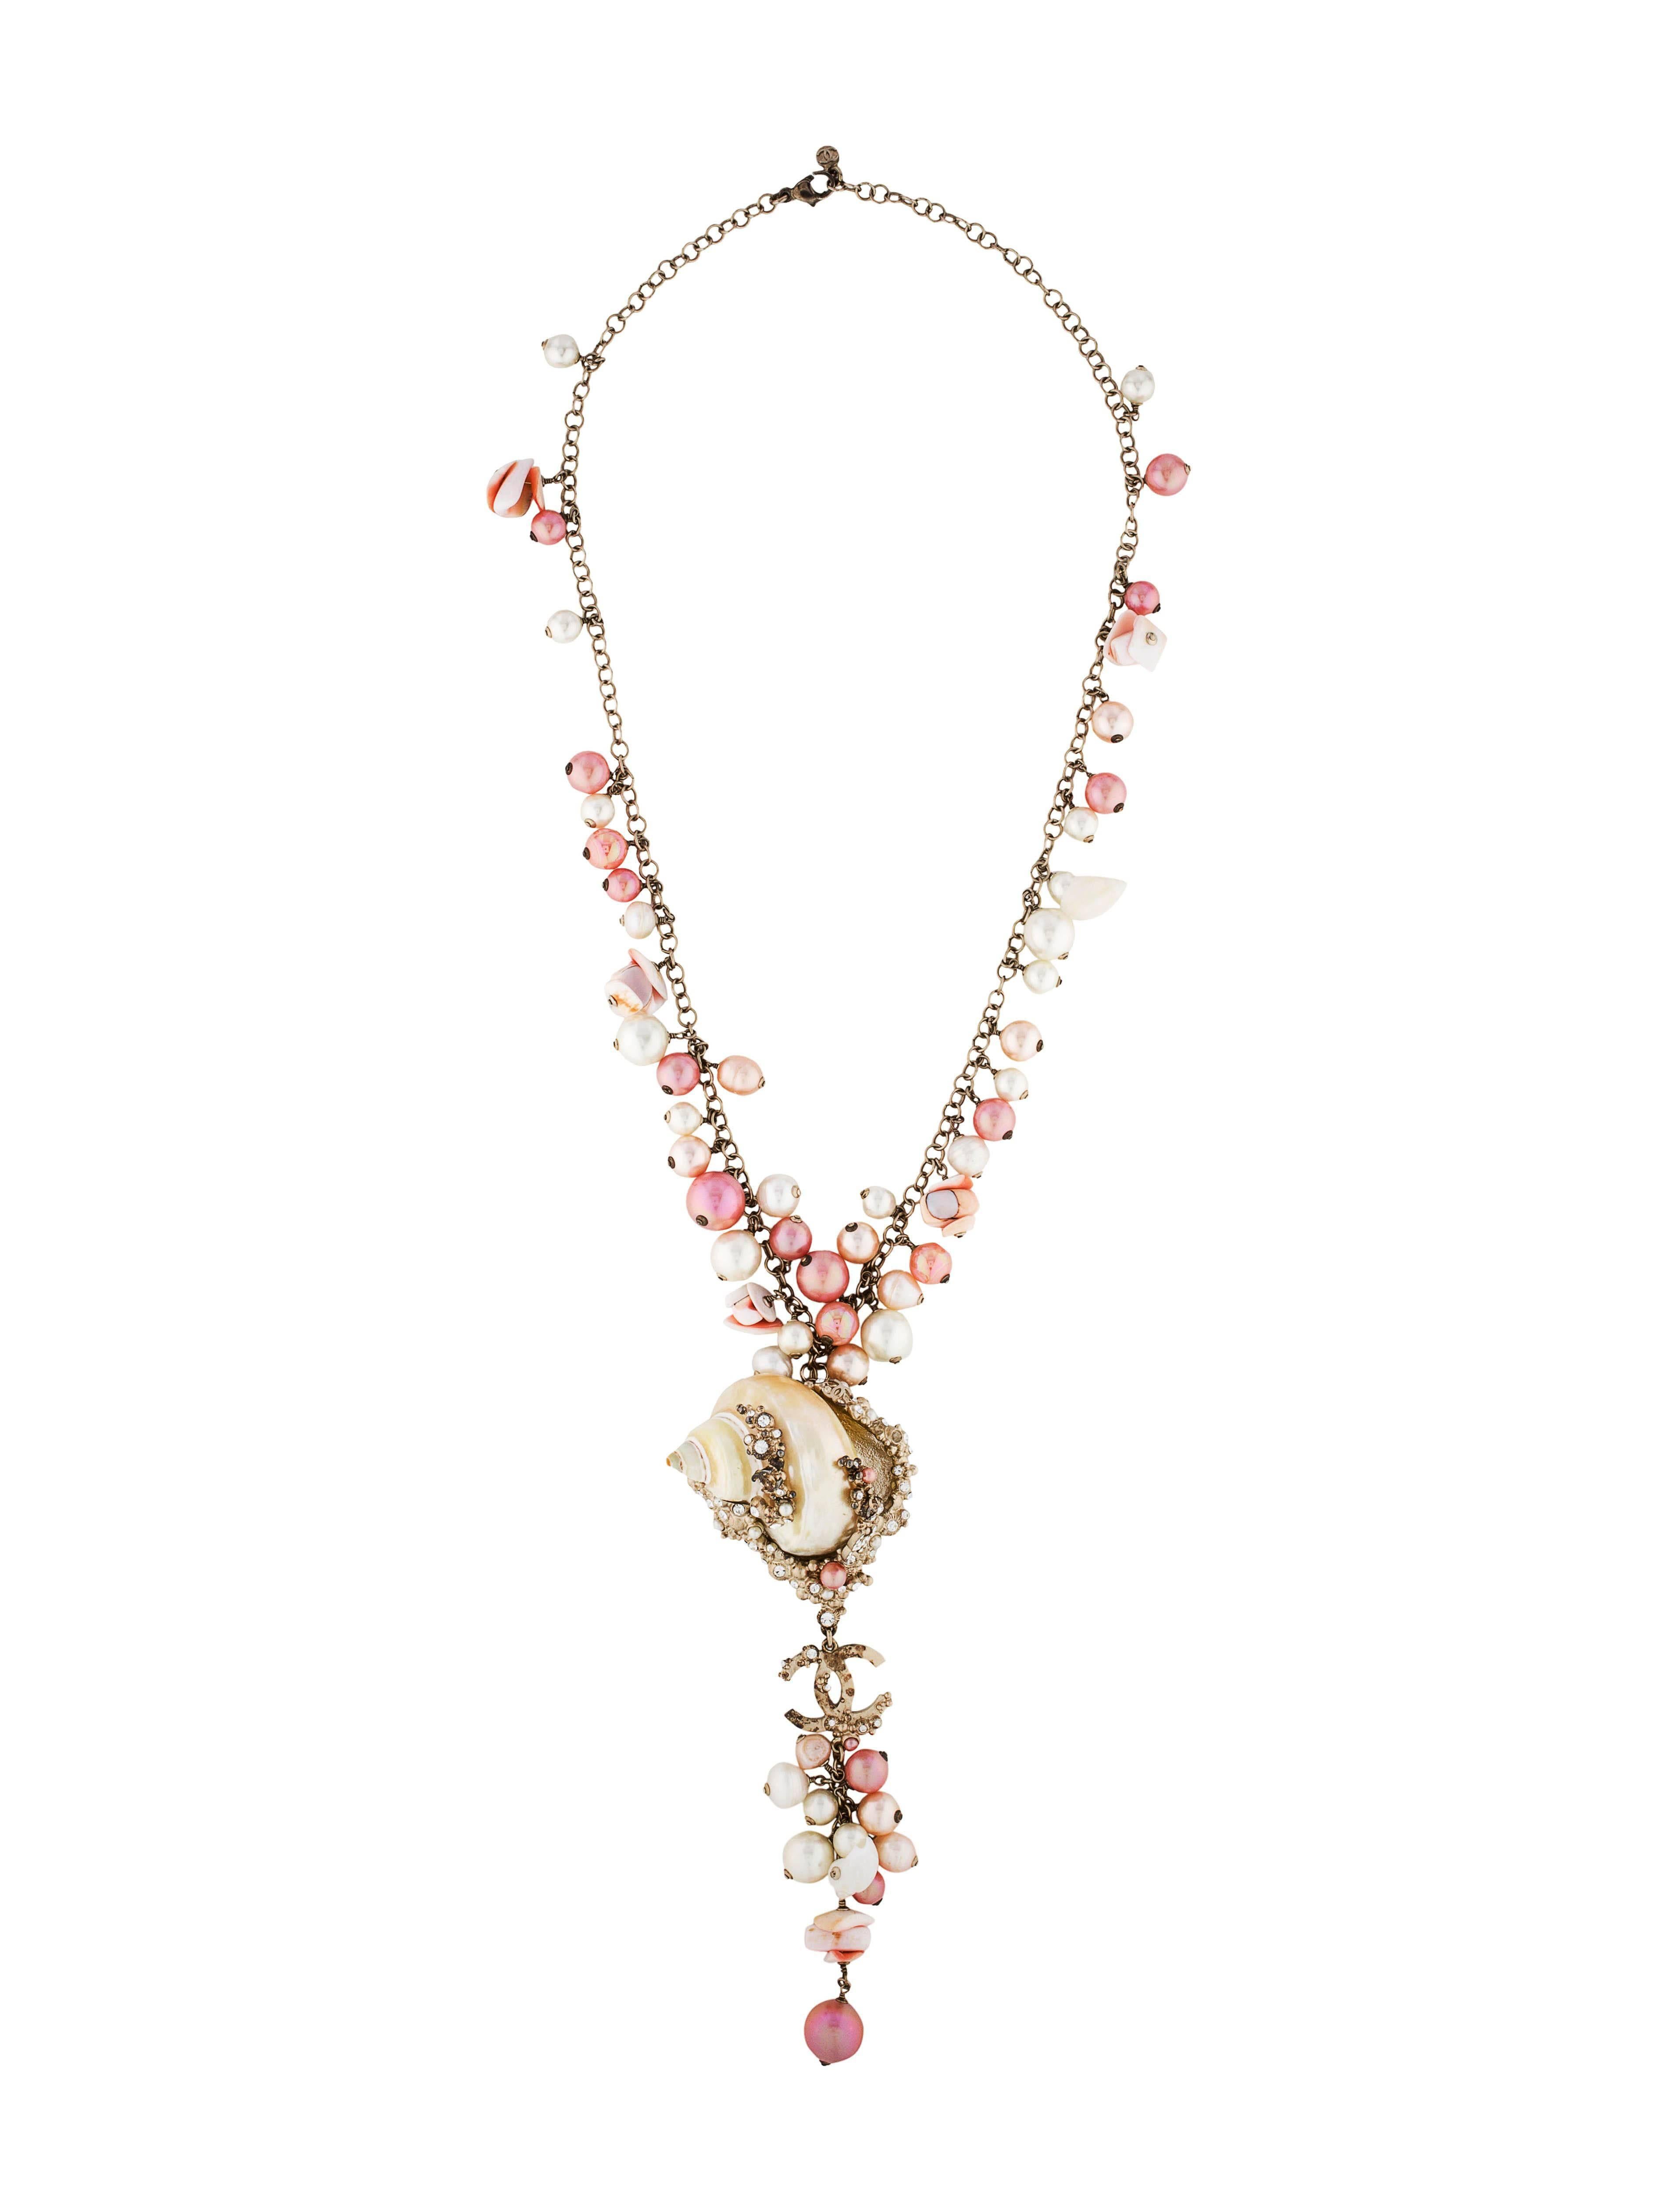 Chanel Pink & White MOP Shell Drop Necklace
​Features pink, peach and ivory faux pearls & shell chips
Made In: France
Year of Production: 2007
Color: Pink, ivory, peach and brass
Materials: MOP shells, beads, faux pearls, rhinestones and